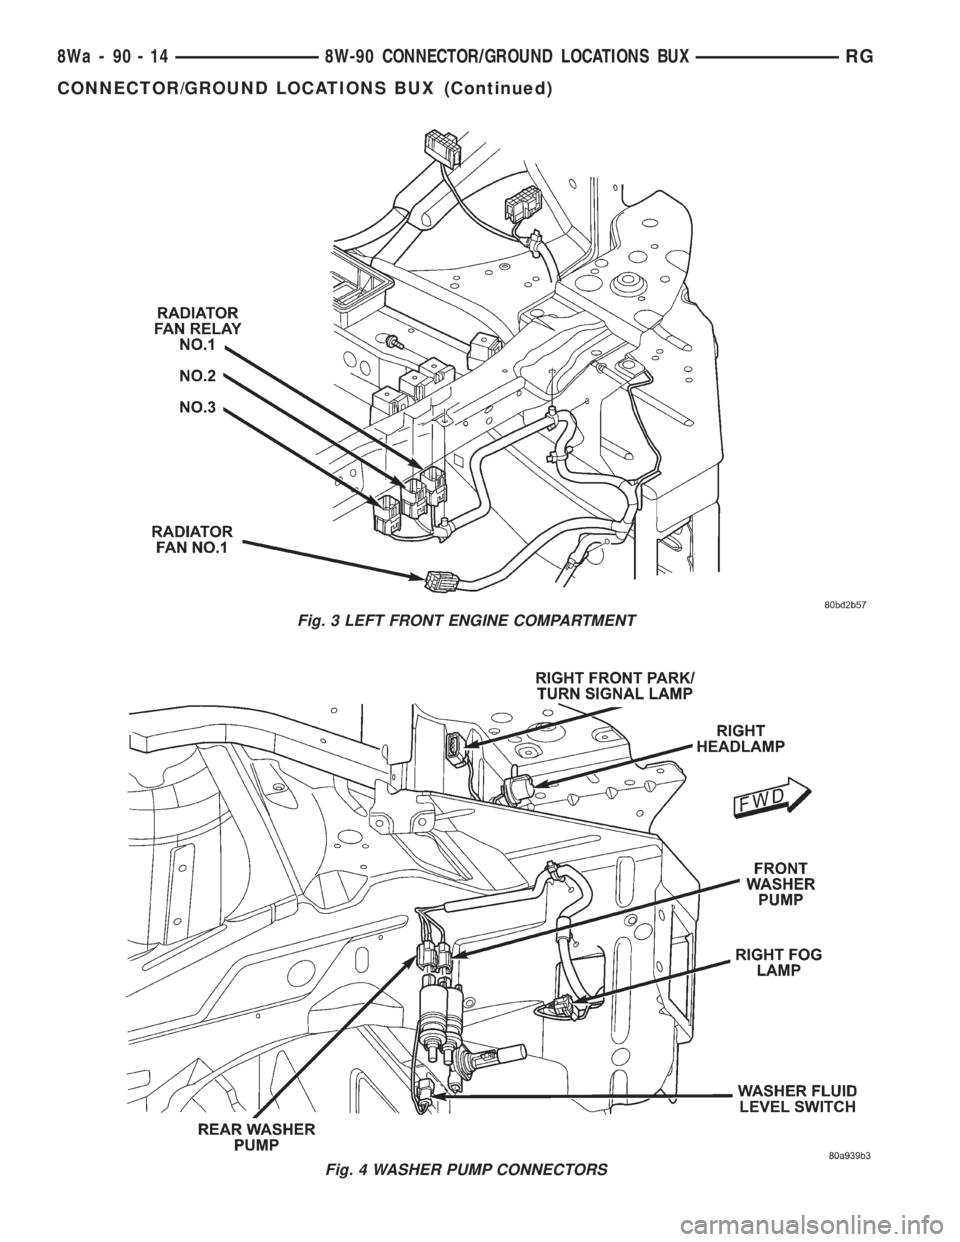 CHRYSLER VOYAGER 2001  Service Manual Fig. 3 LEFT FRONT ENGINE COMPARTMENT
Fig. 4 WASHER PUMP CONNECTORS
8Wa - 90 - 14 8W-90 CONNECTOR/GROUND LOCATIONS BUXRG
CONNECTOR/GROUND LOCATIONS BUX (Continued) 